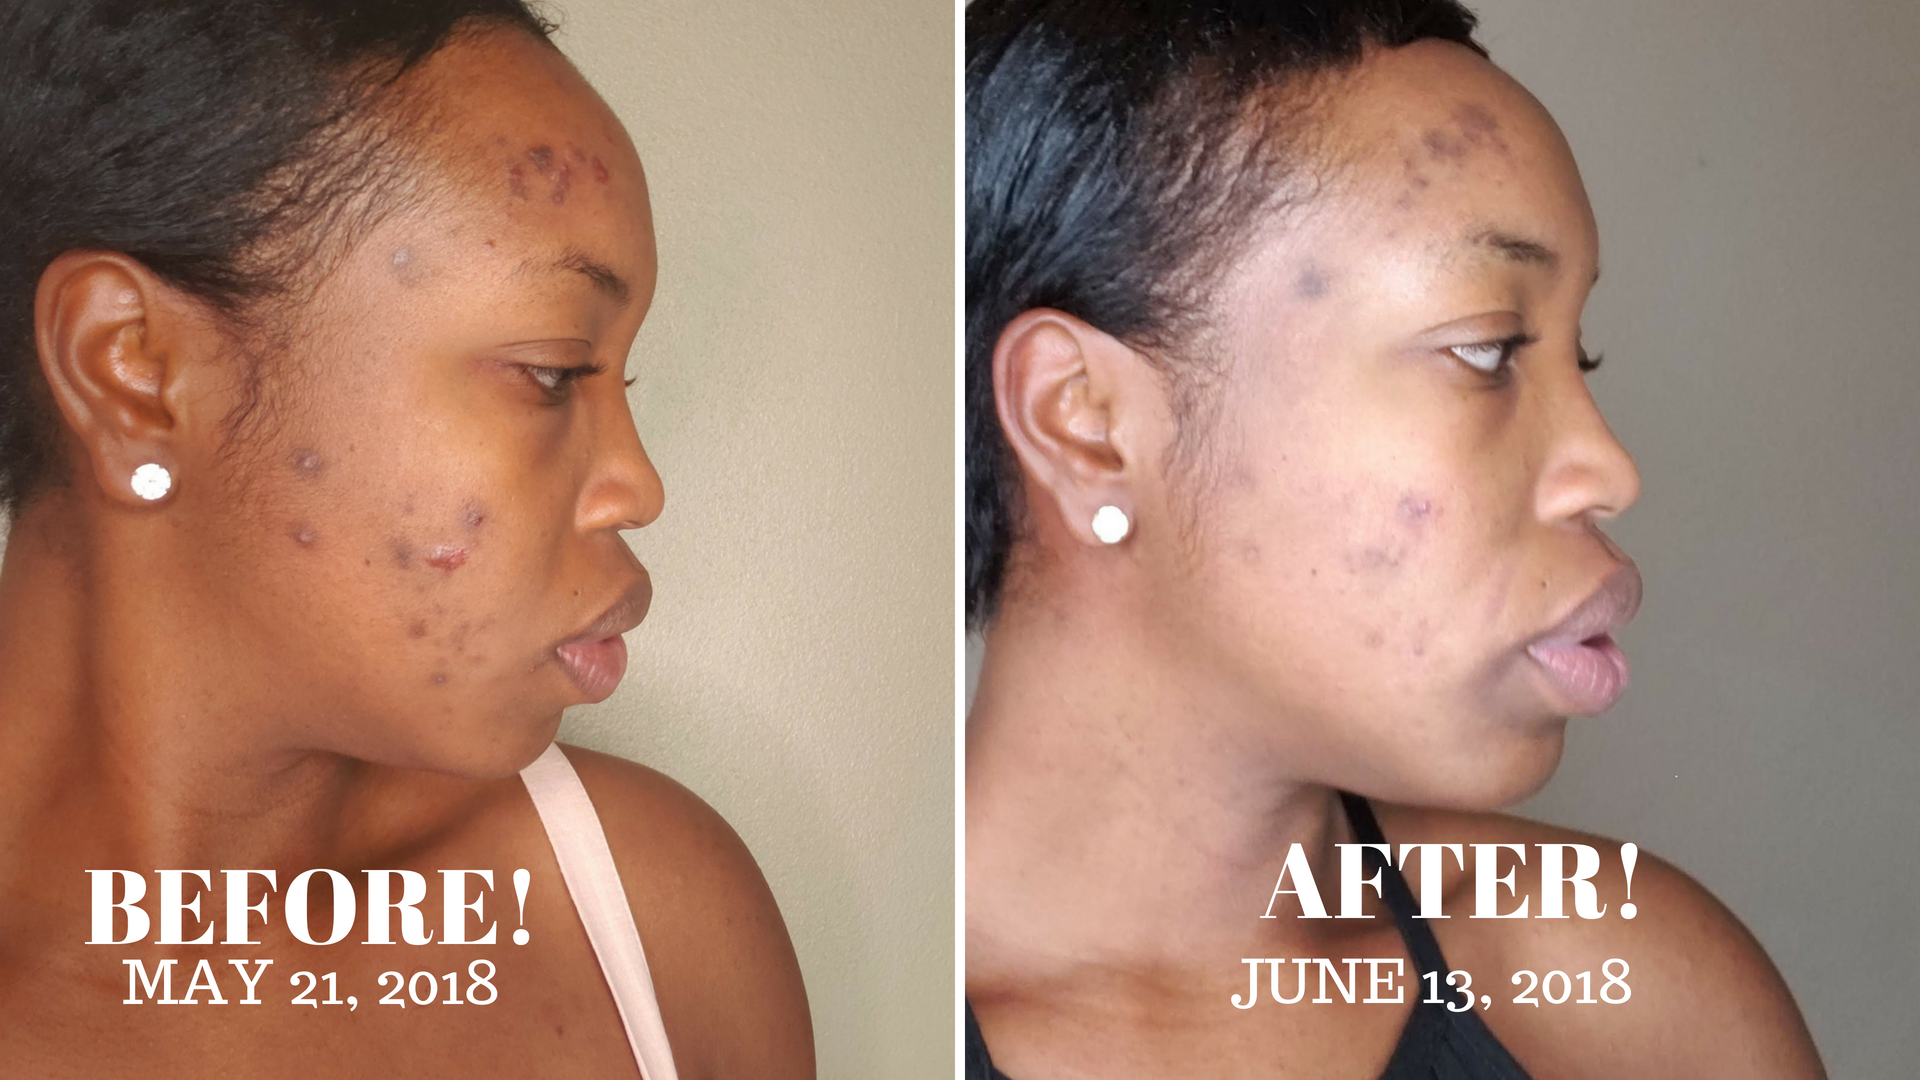 Chemical Peel Before During and After image